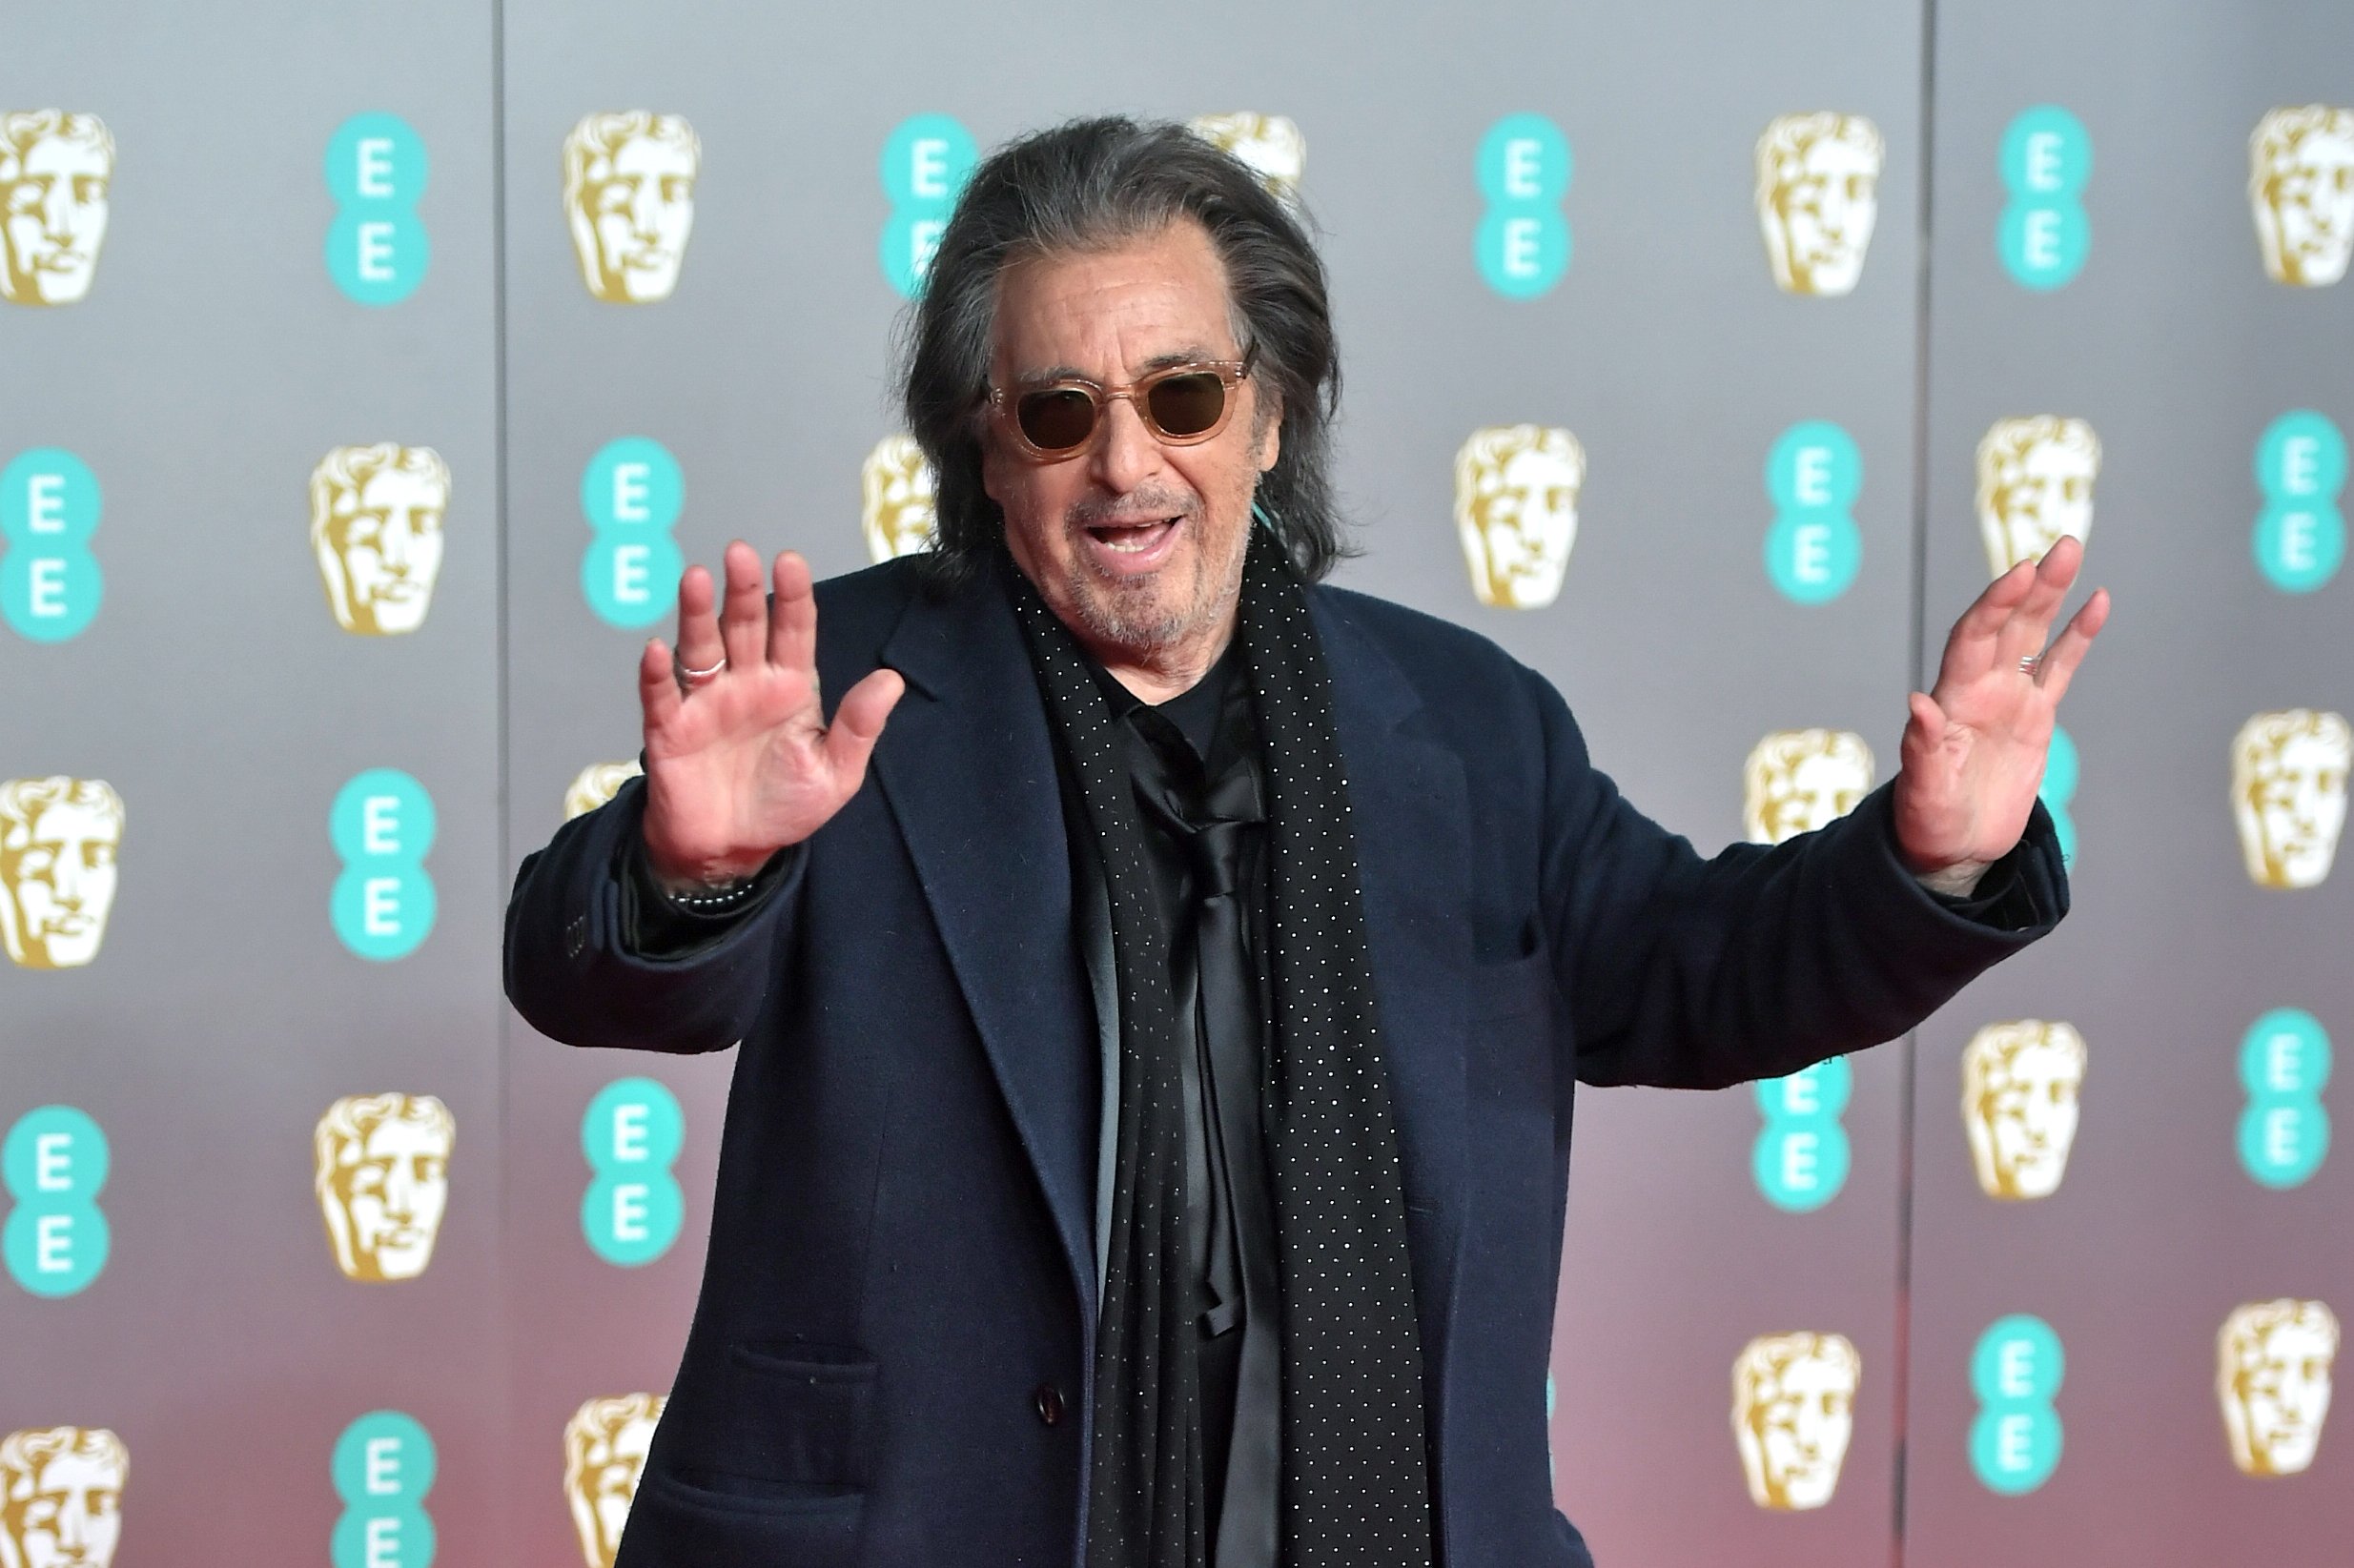 Al Pacino attends the EE British Academy Film Awards 2020 at Royal Albert Hall on February 2, 2020, in London, England. | Source: Getty Images